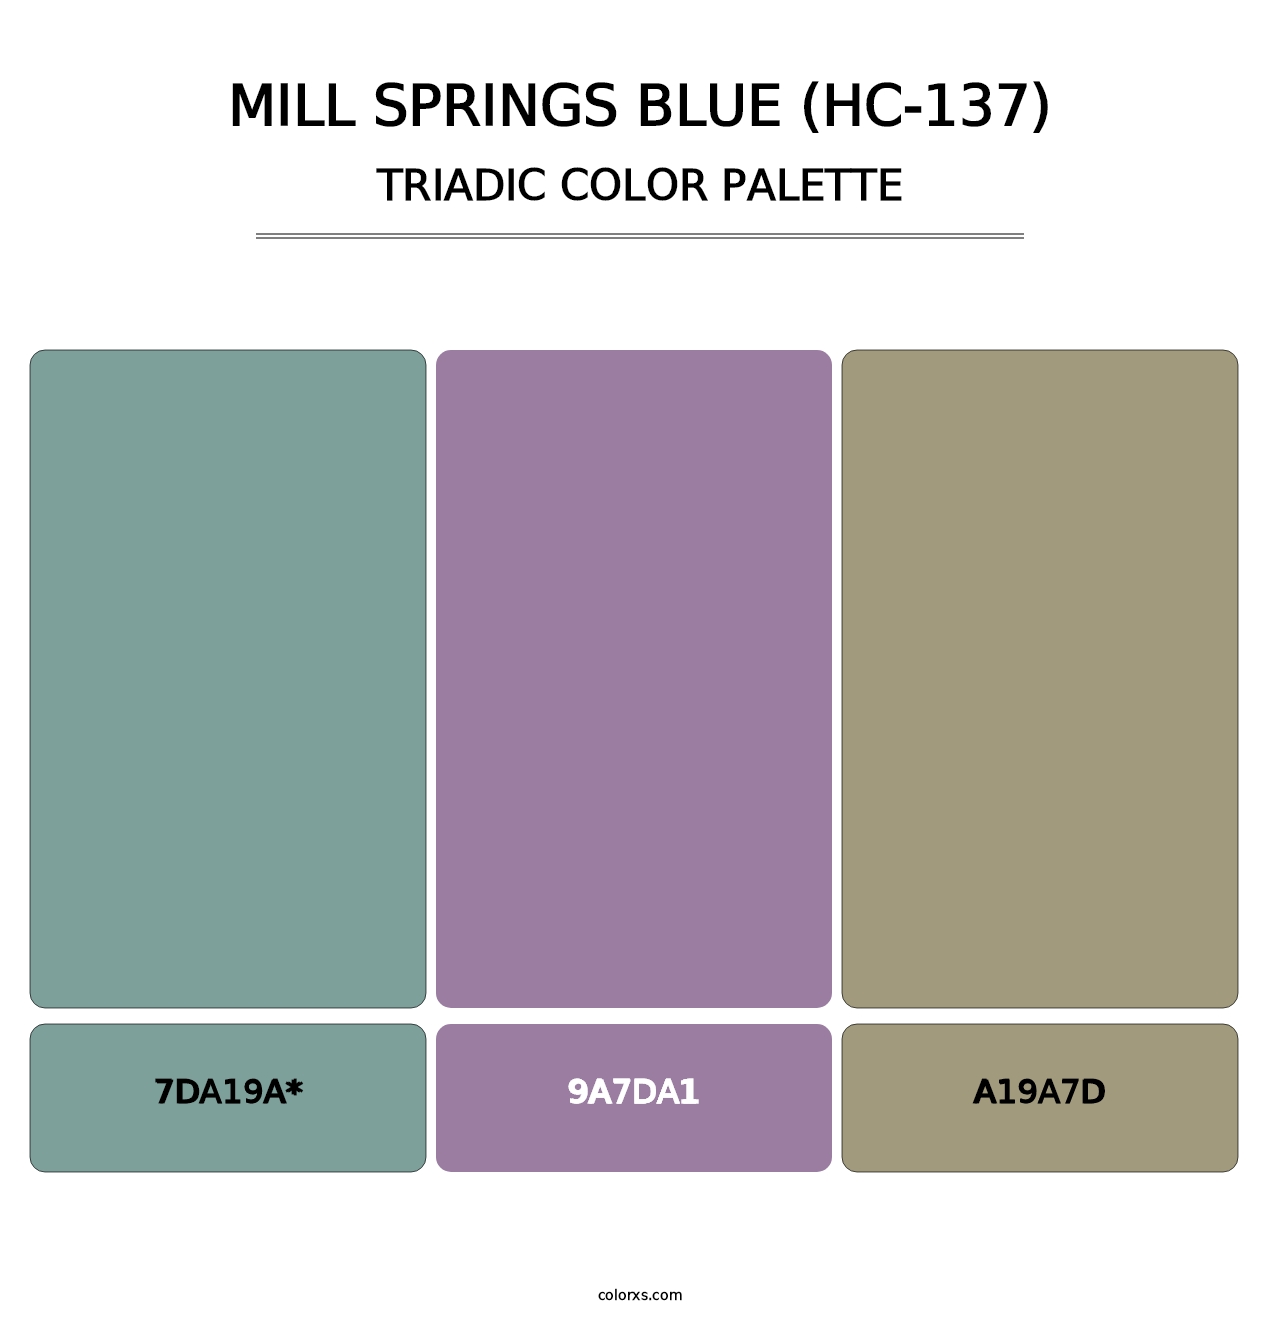 Mill Springs Blue (HC-137) - Triadic Color Palette